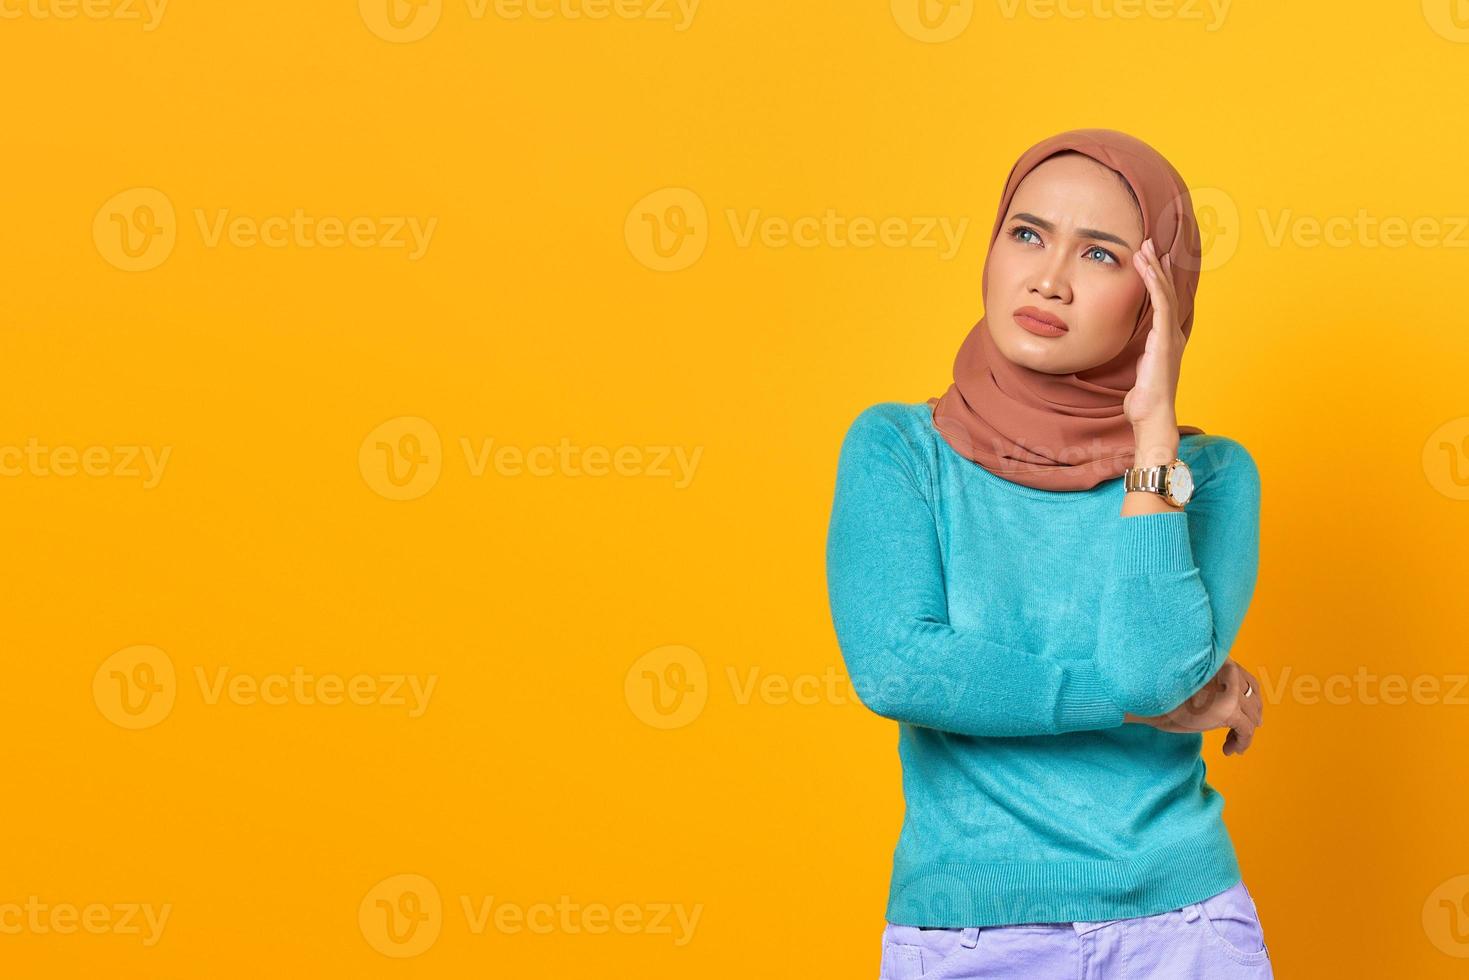 Pensive young Asian woman thinking about something on yellow background photo